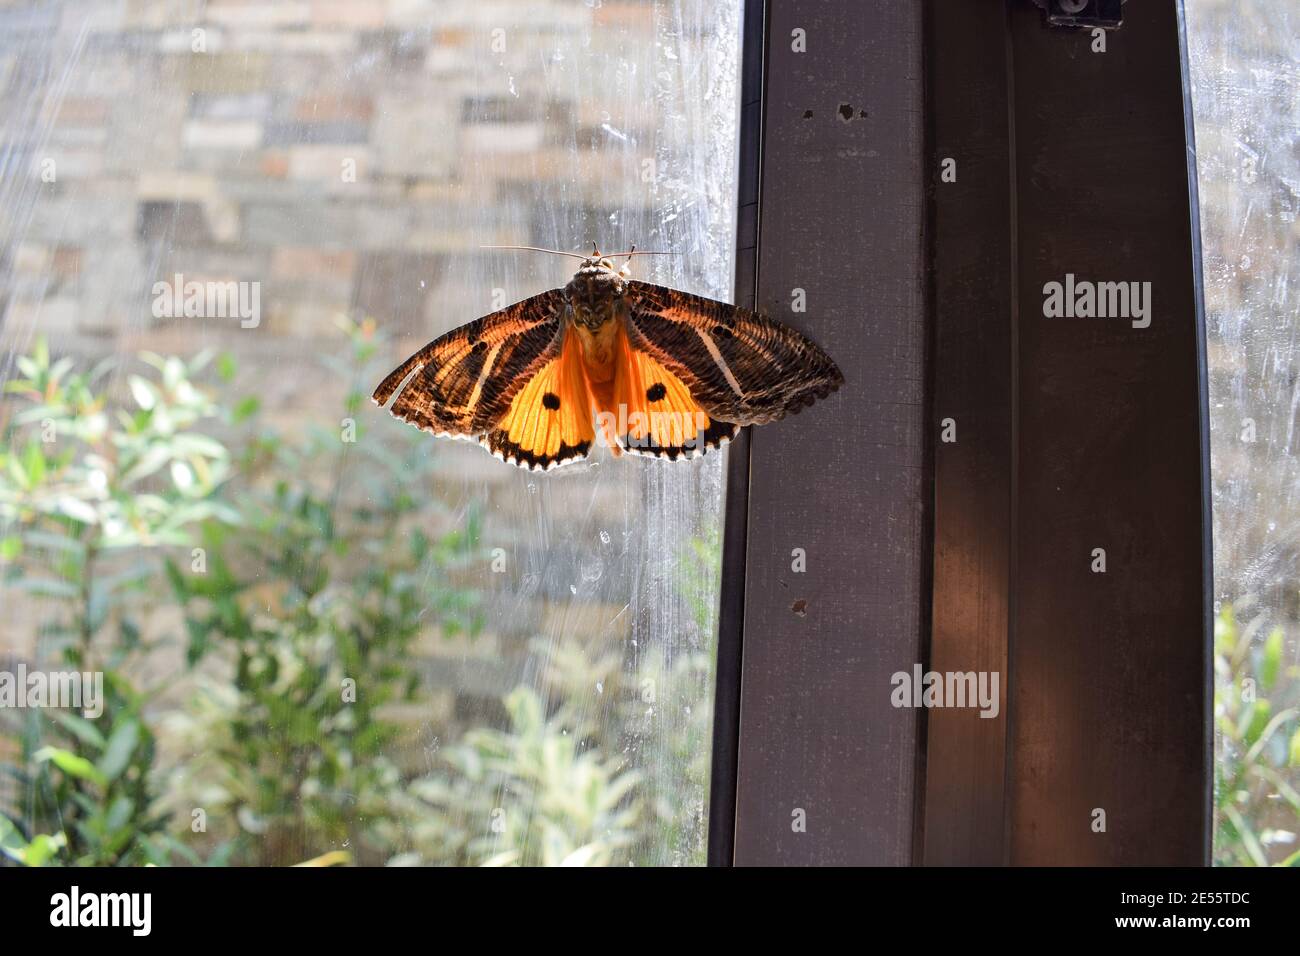 Eudocima materna Indian butterfly , Eudocima apta orange moth butterfly. nocturnal orange butterfly with black stripes and dots and white design patte Stock Photo